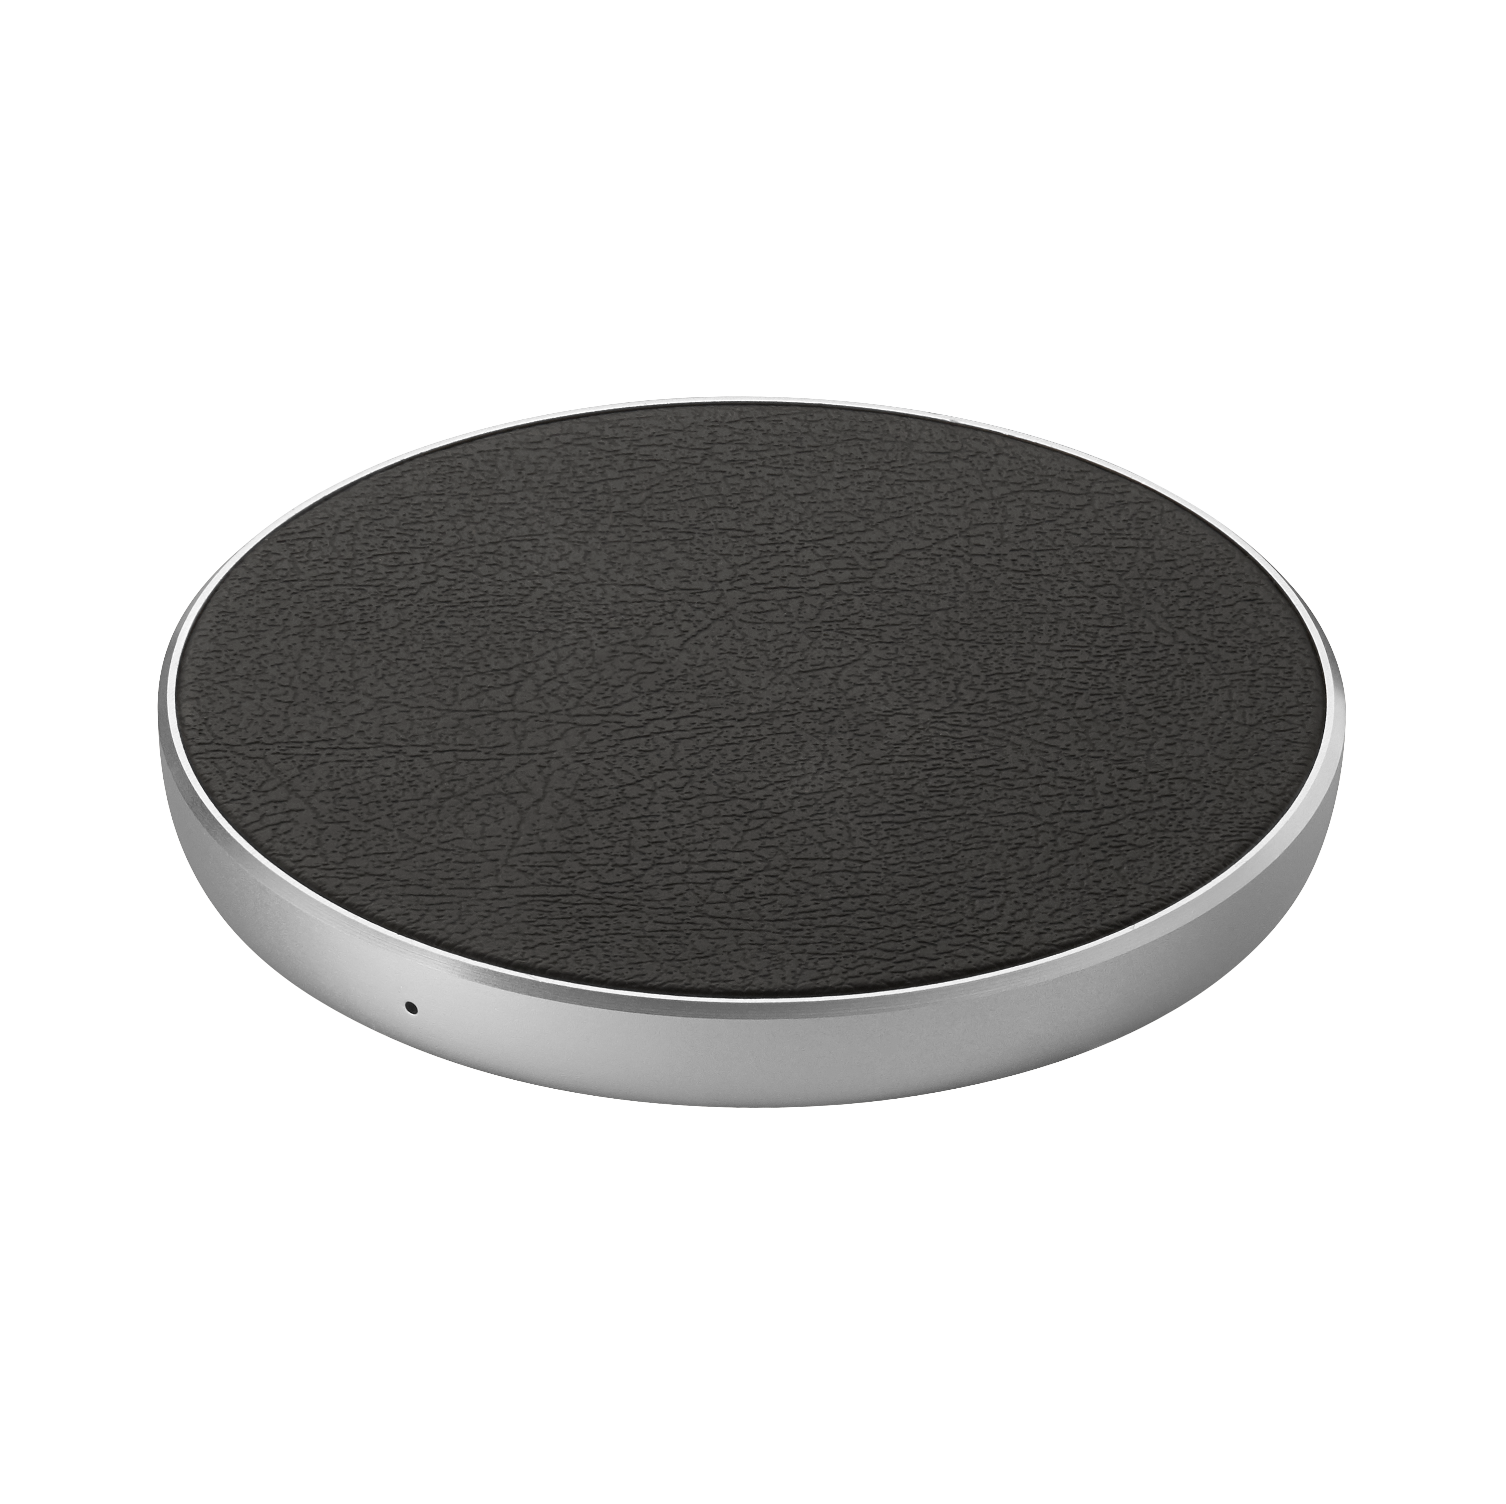 TAW-7.5AW Ultra slim fast wireless charger 